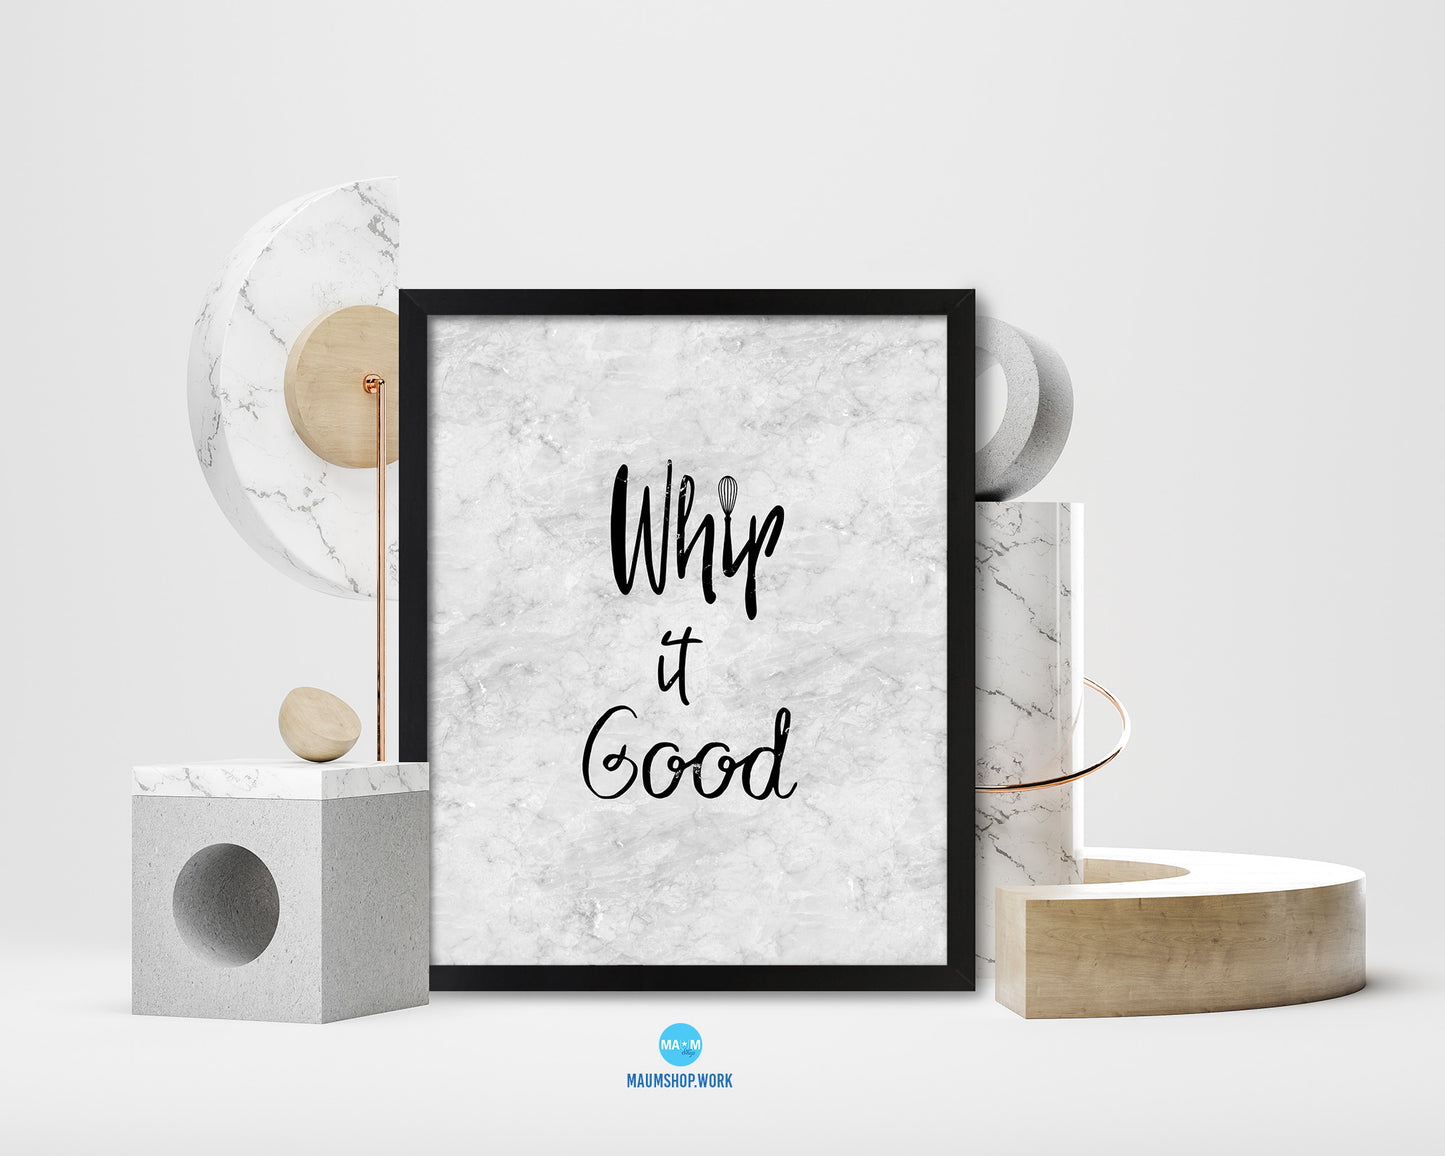 Whip it good Quote Framed Print Wall Art Decor Gifts